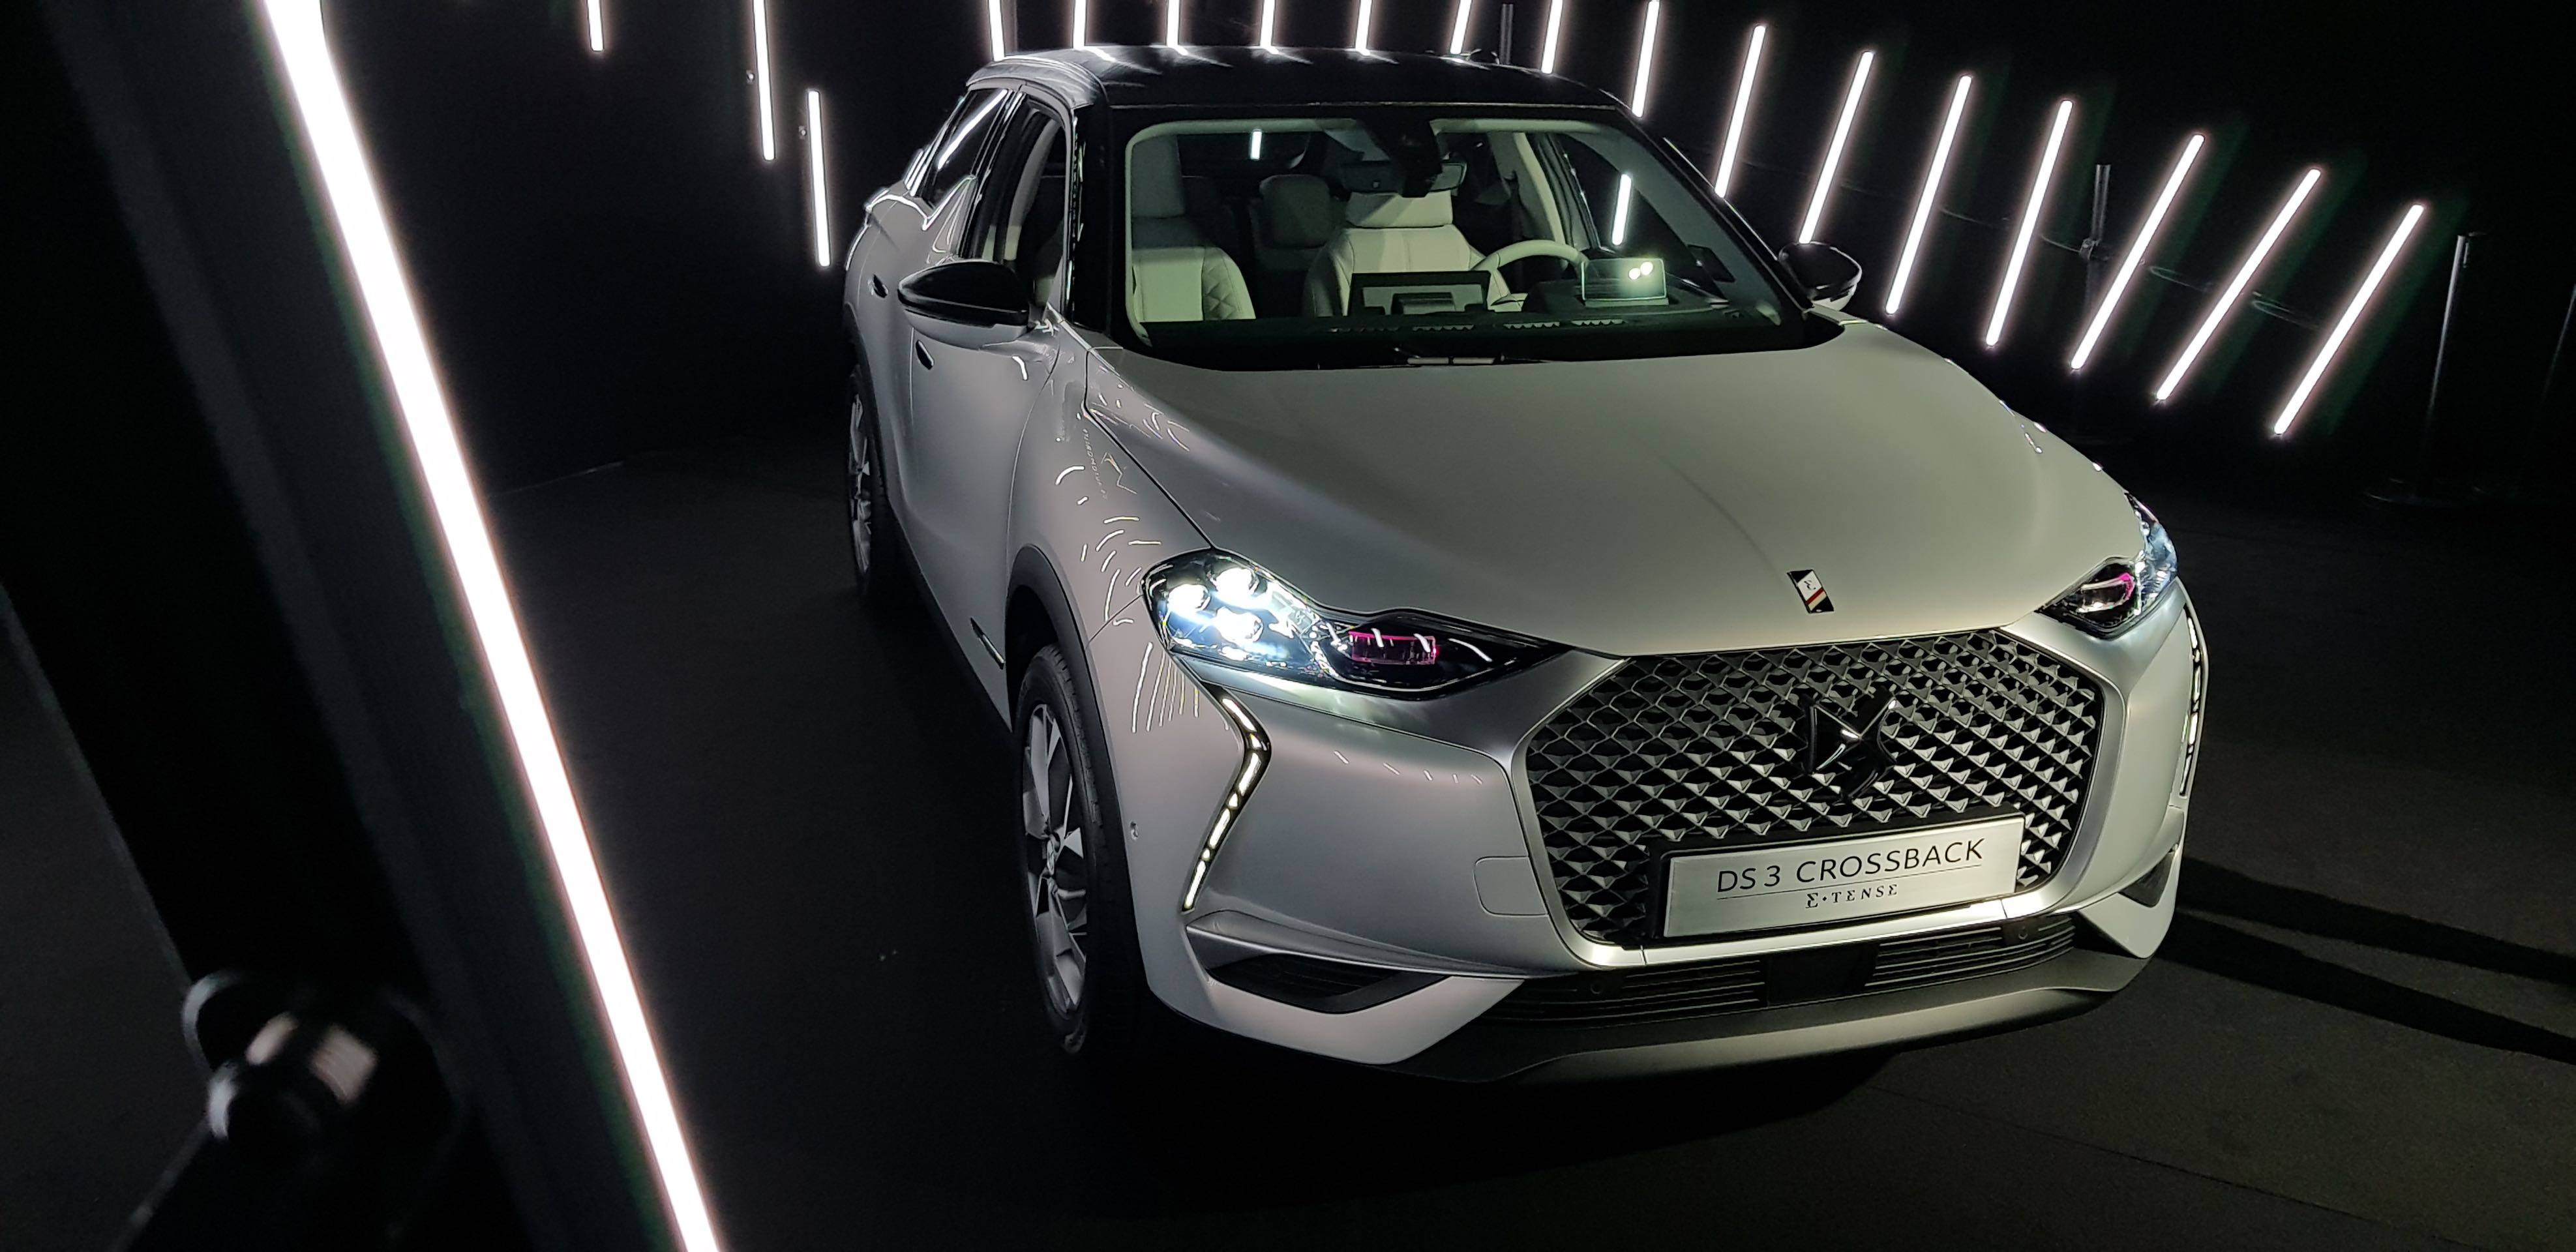 The Best 2019 Citroen Ds3 New Model and Performance, Car Design 2019